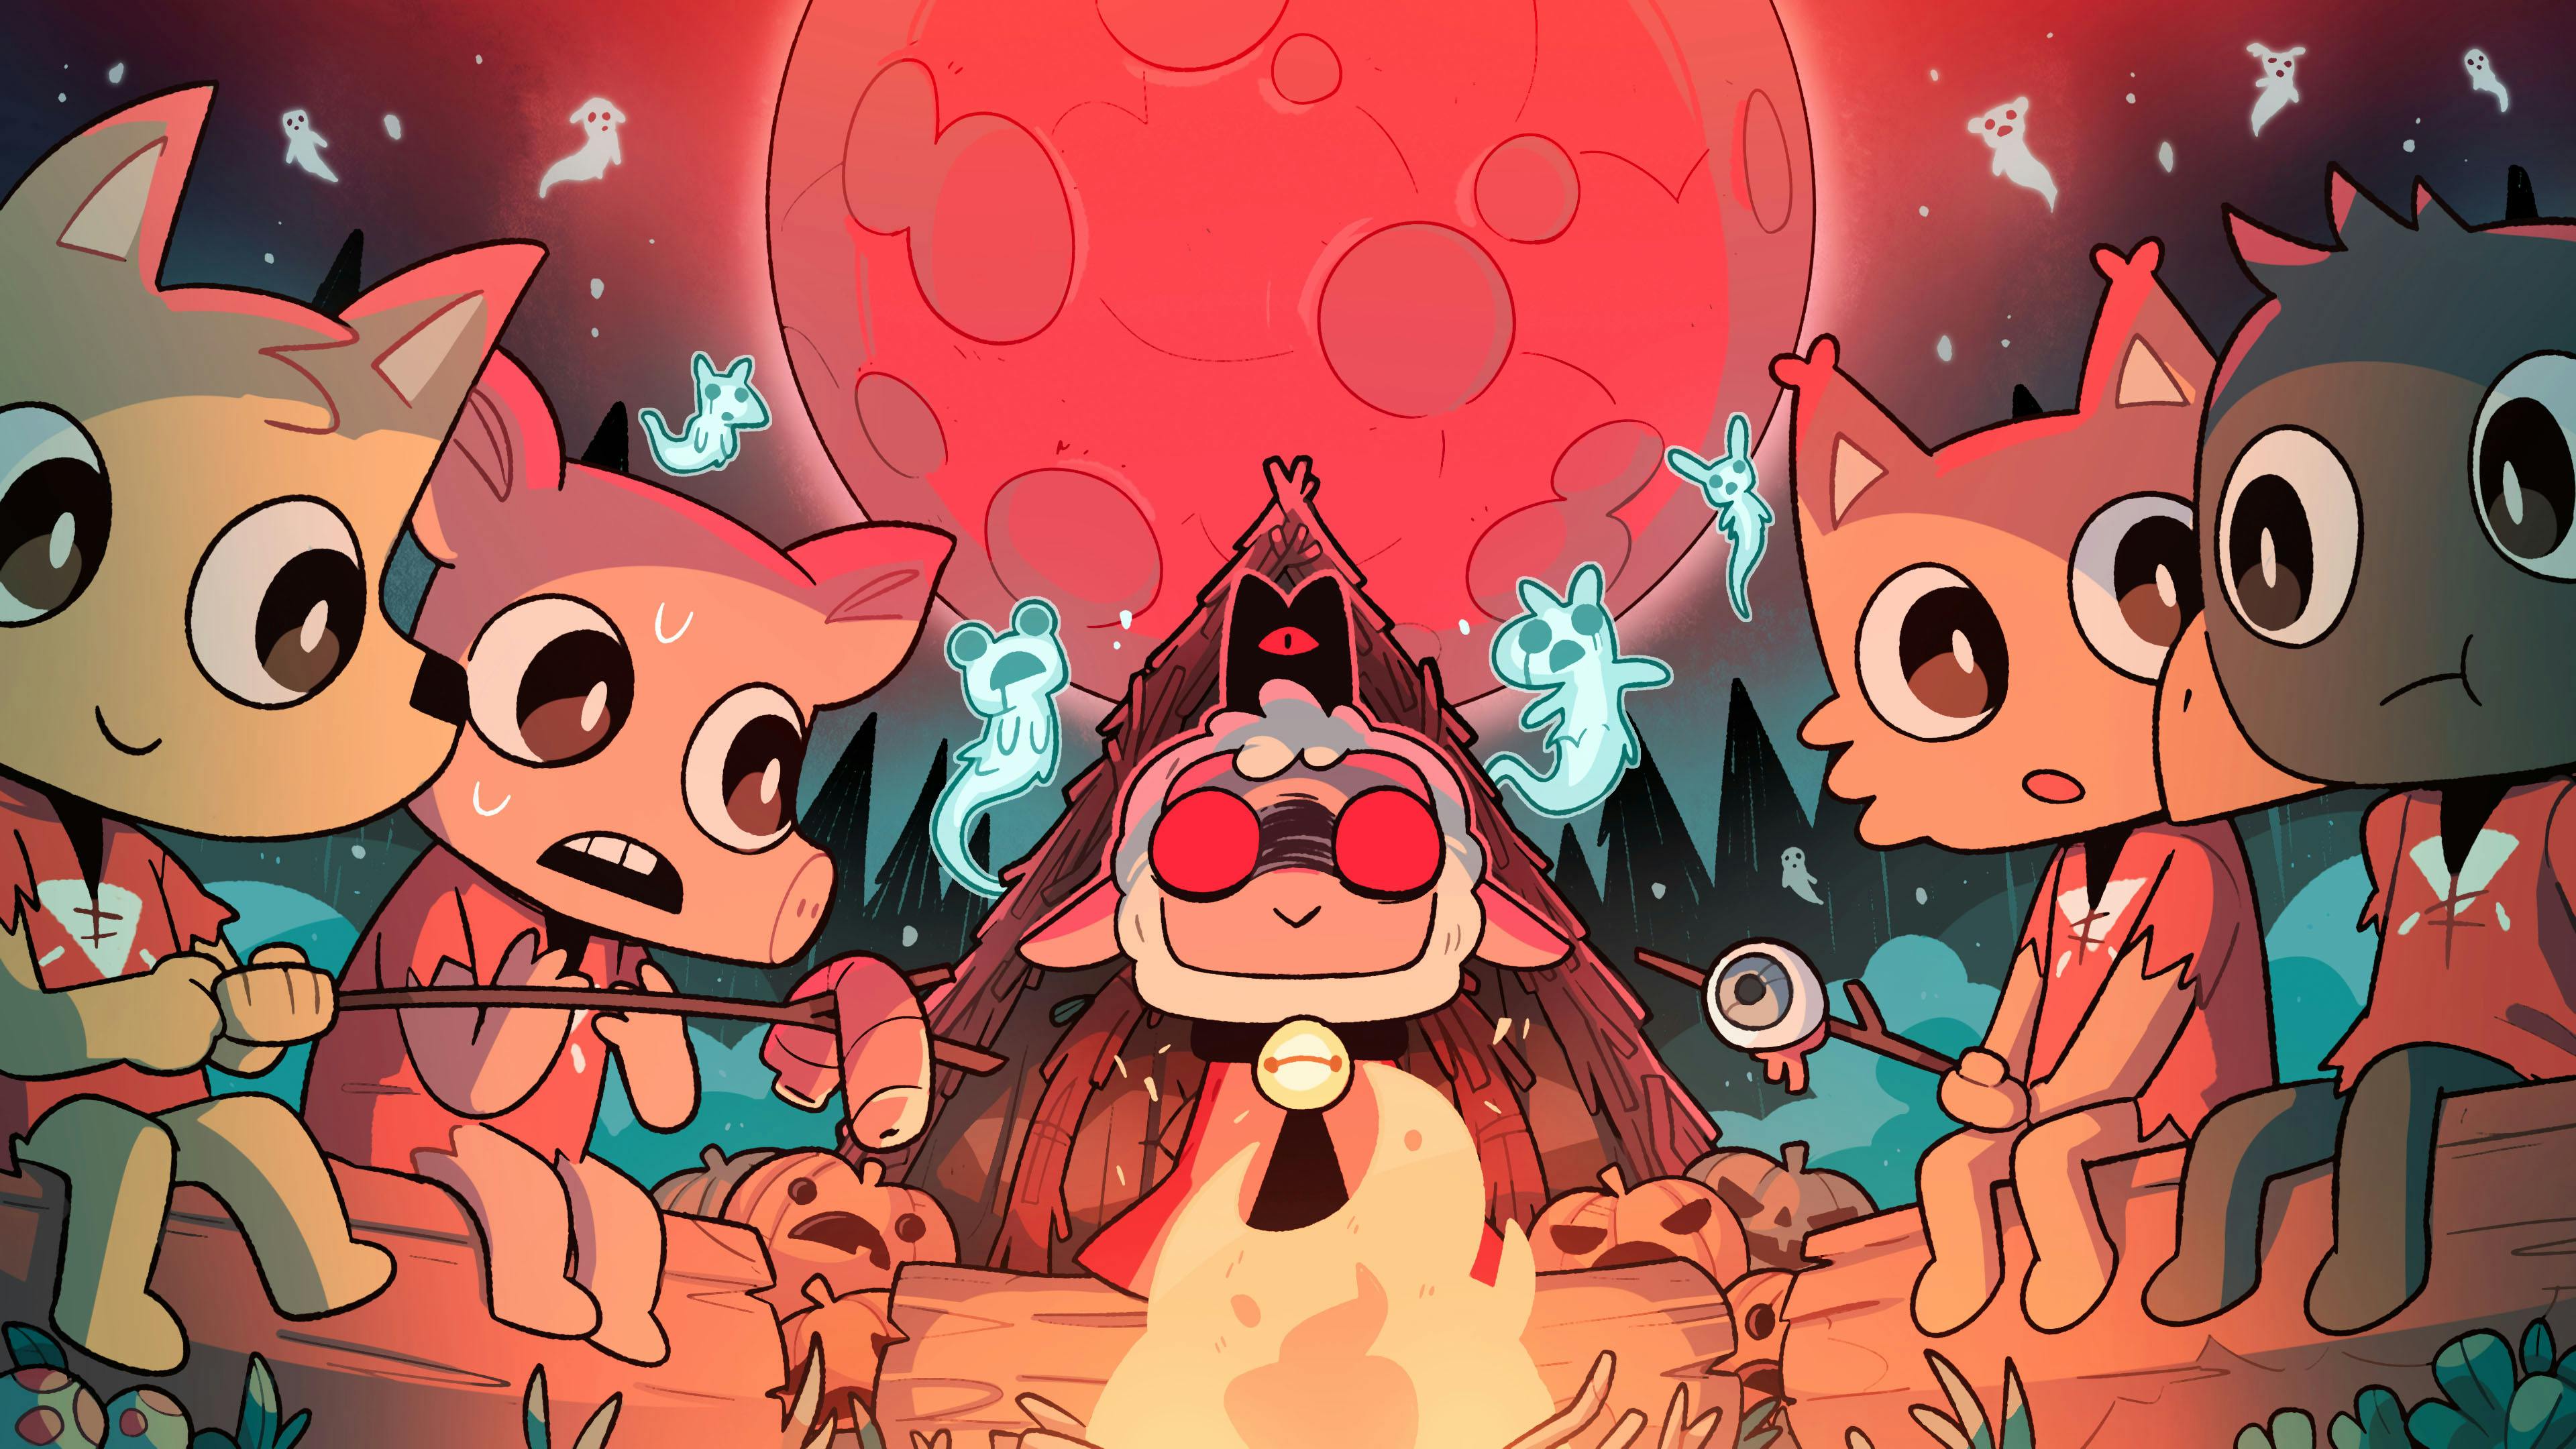 Cult of the Lamb art with cultists sitting around an open fire, roasting marshmallows. In the center is the cult leader sheep under a blood moon.